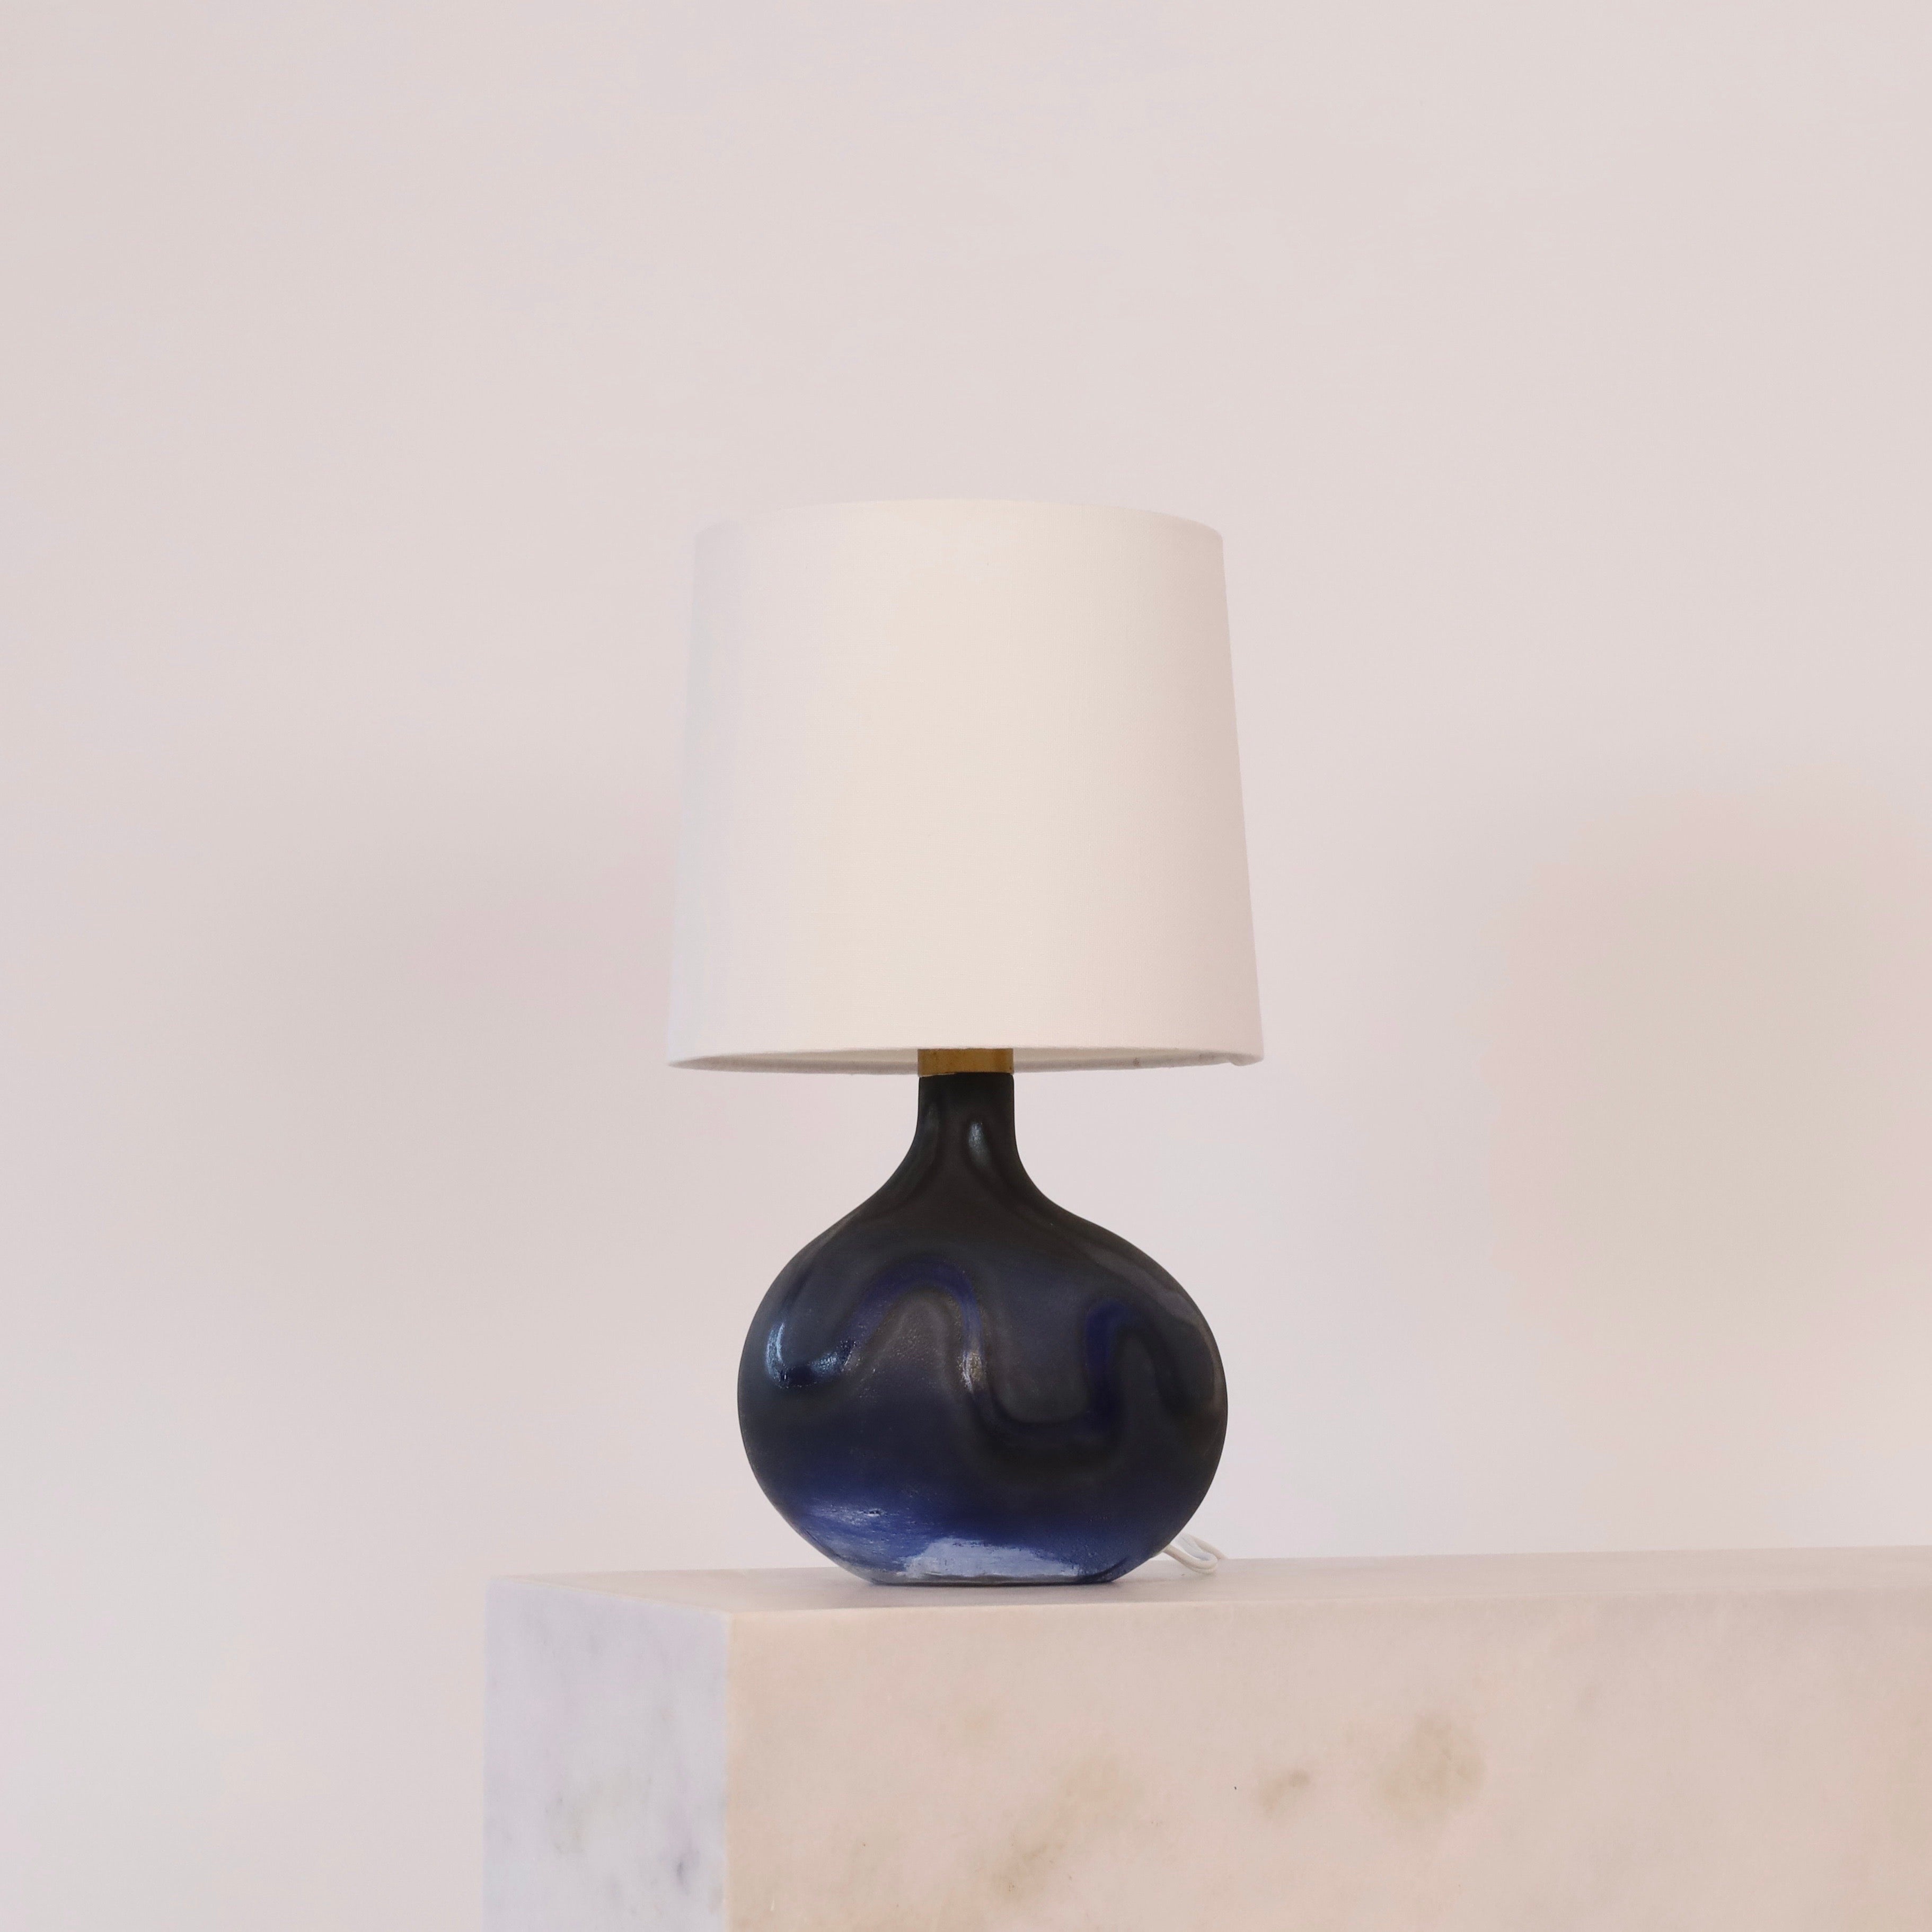 A Modern Lamp Art glass desk lamp in organic shaped designed by Michael Bang in 1972 for Holmegaard, Denmark. Irresistible to eye.

* A blue patterned mouth-blown organic glass table lamp with a white fabric shade
* Designer: Michael Bang 
* Style: